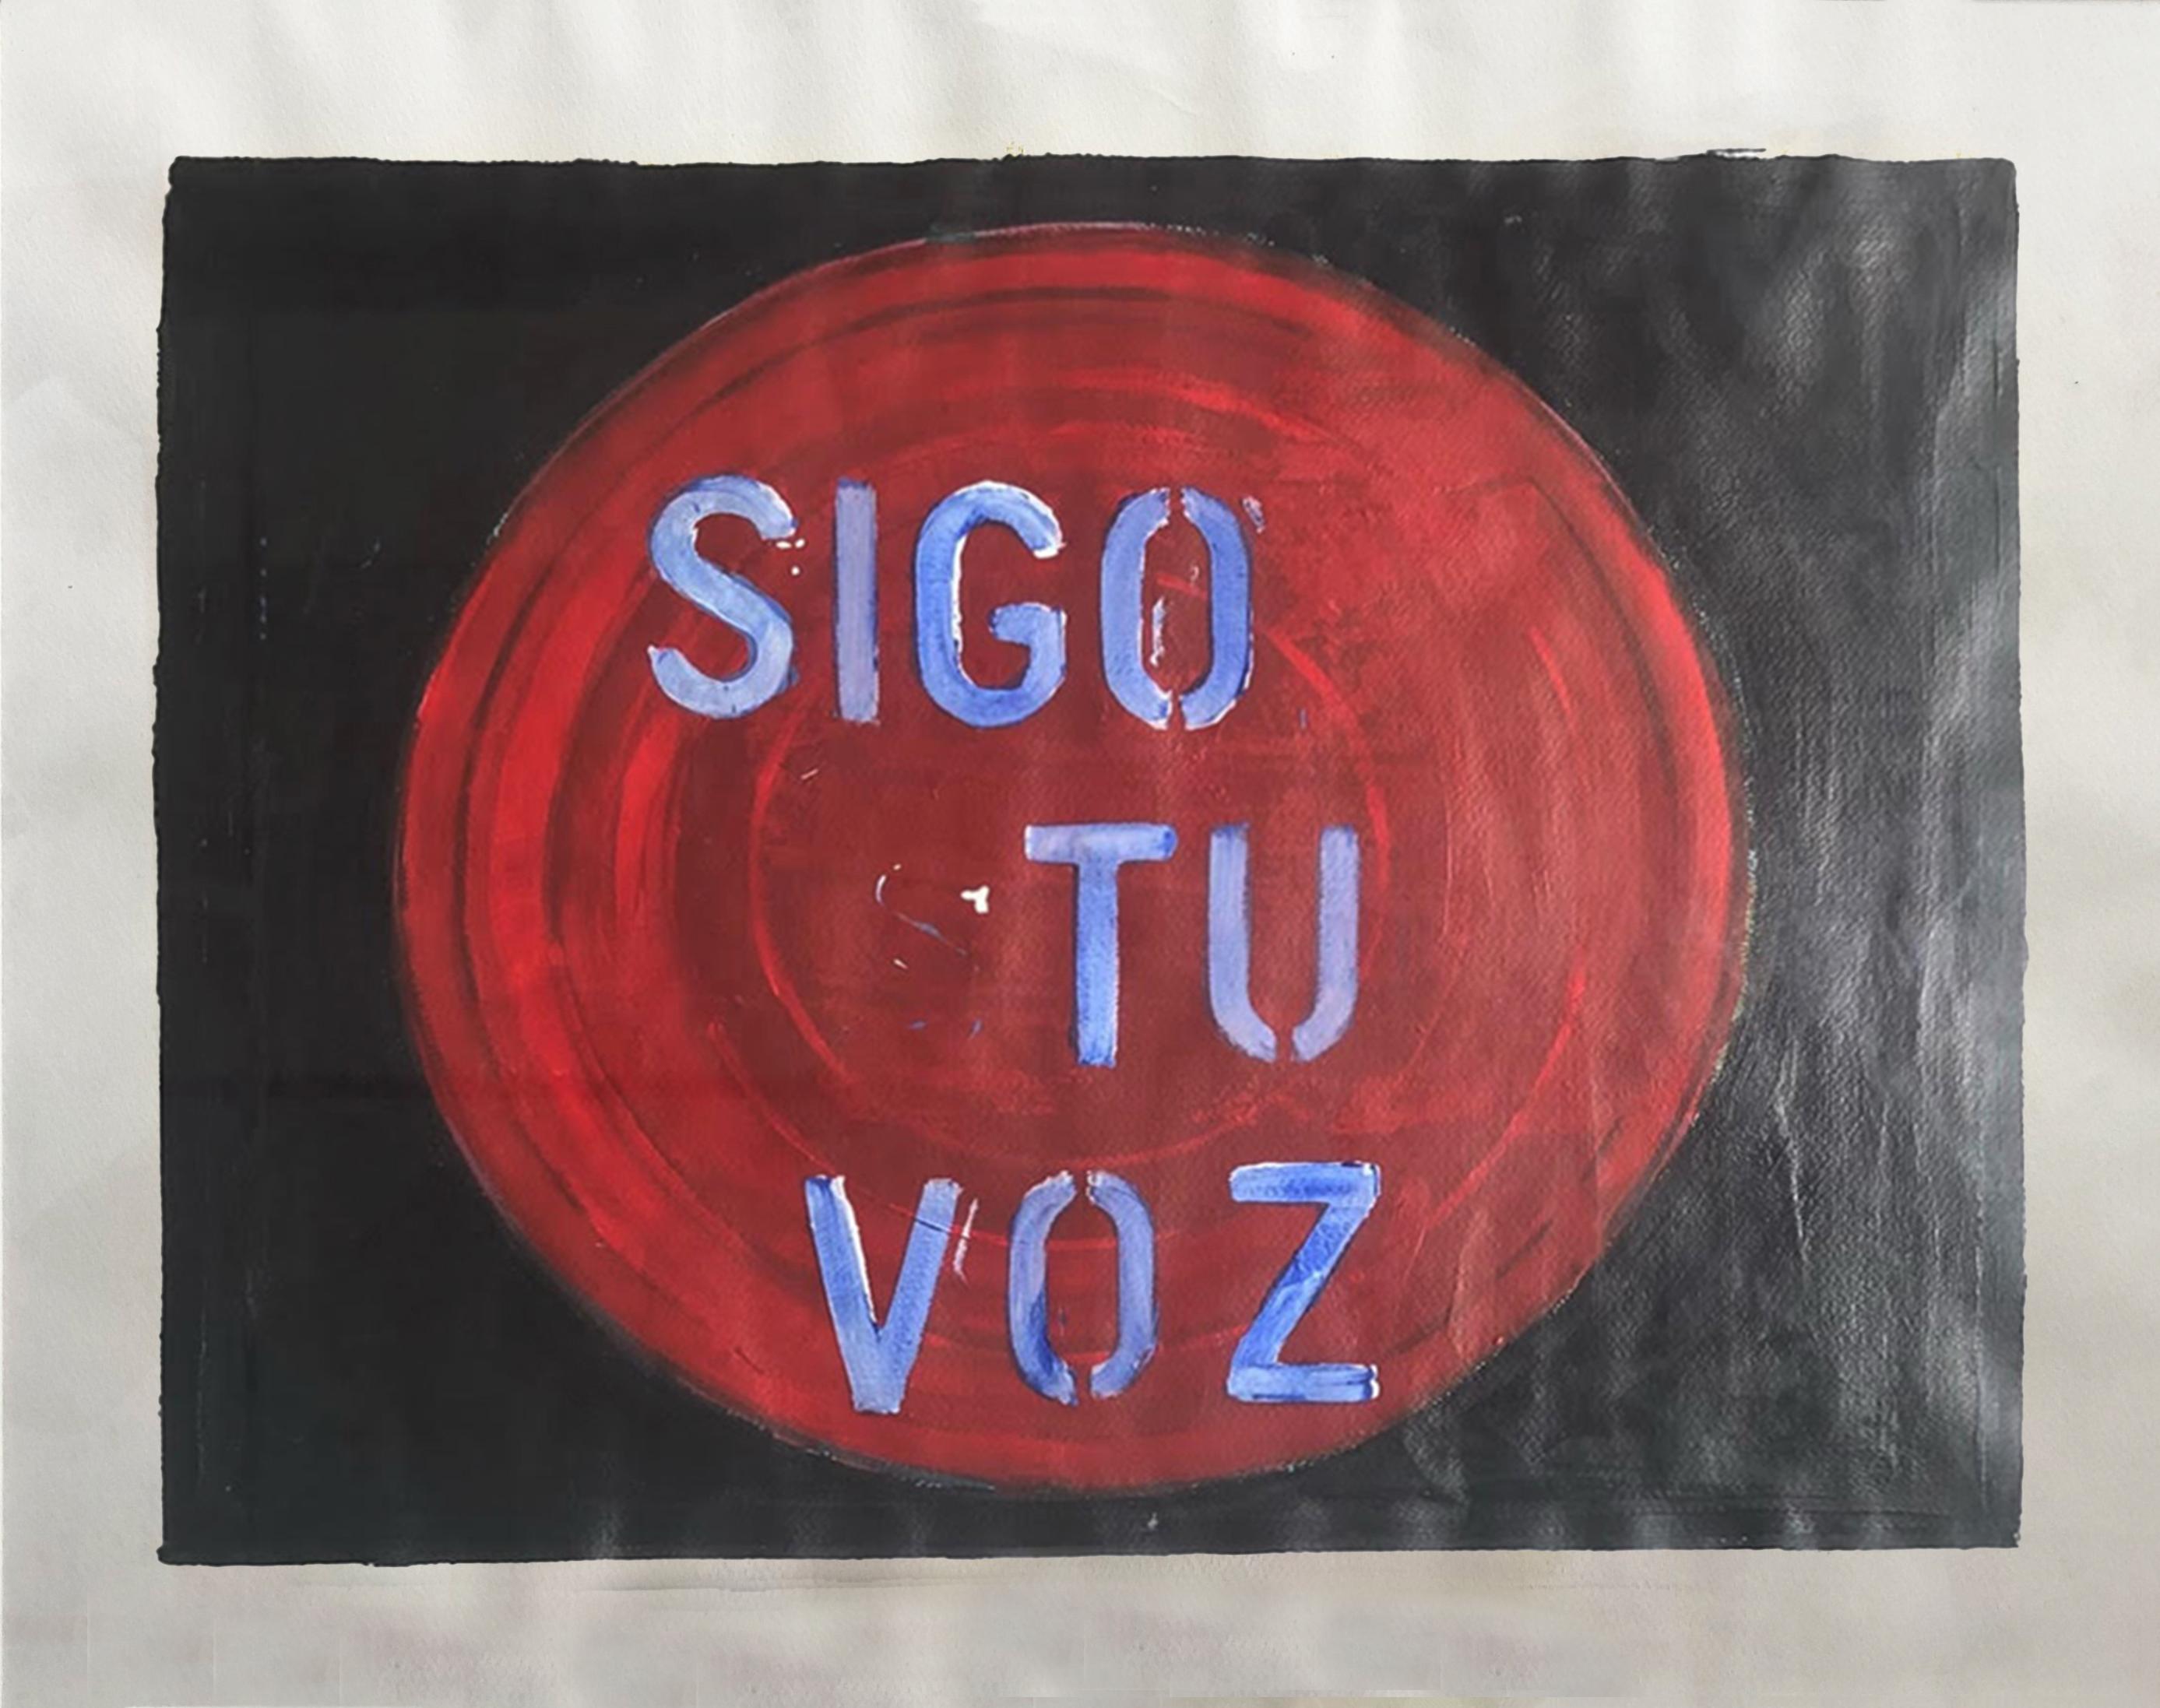 Blue Note, Sigo tu voz and Solo (Triptych), 2006 by Sergio Bazan
From the Chaleco Quimico series
Acrylic paint on paper
Overall image size: 18 H x 75 W inches


Individual size:
Image Size: 18 H x 25 W inches


Signed by artist

_______

Paintings-